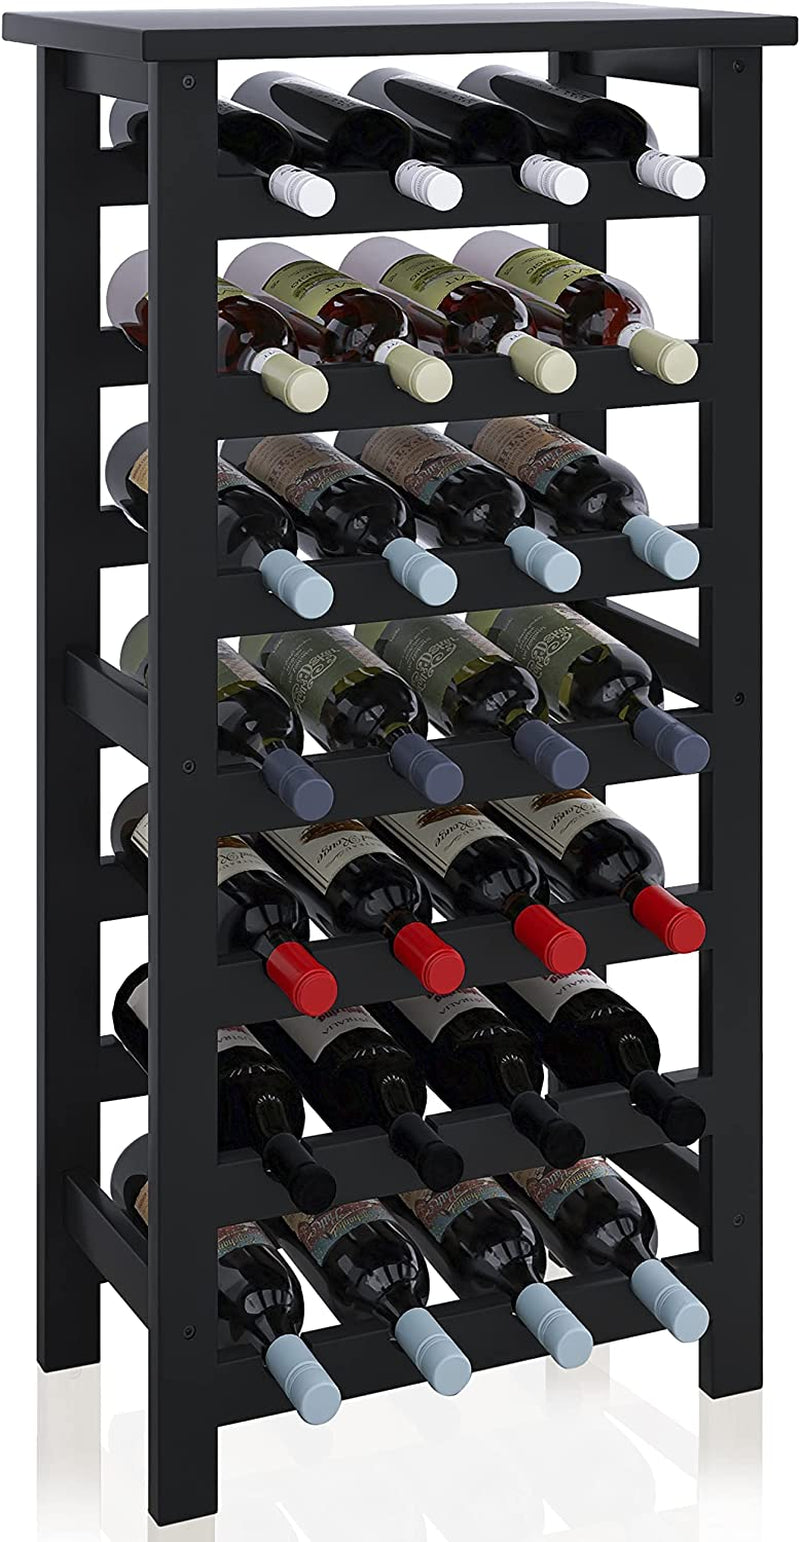 Bamboo Wine Rack, 28 Bottles Display Holder with Table Top, 7-Tier Free Standing Storage Shelves for Kitchen, Pantry, Cellar, Bar (Black)